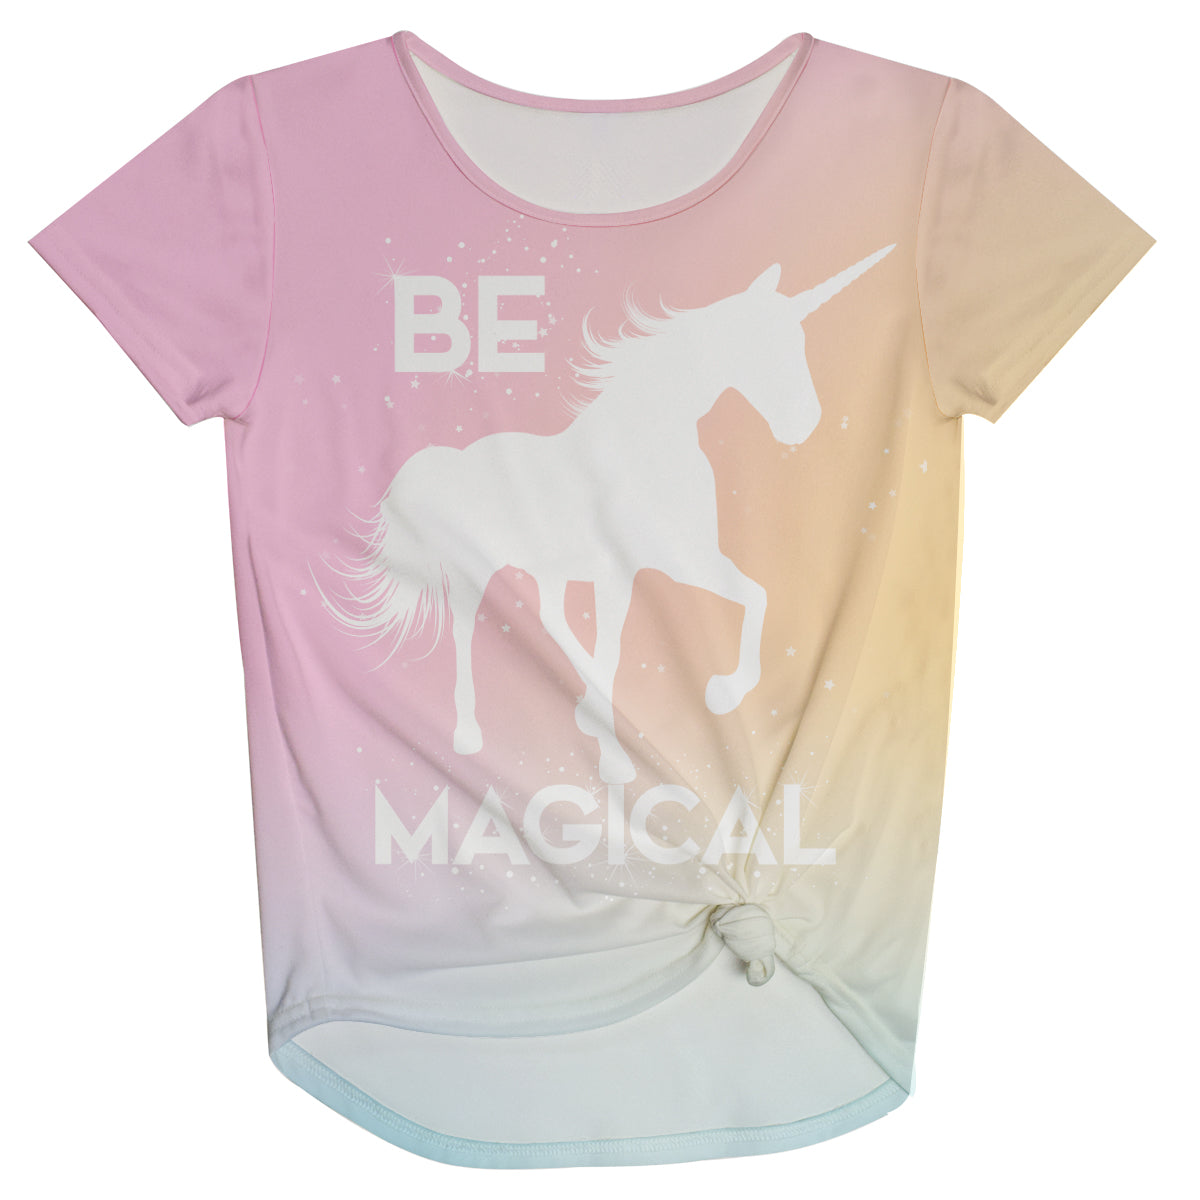 Be Magical Color Degrade Knot Top - Wimziy&Co.